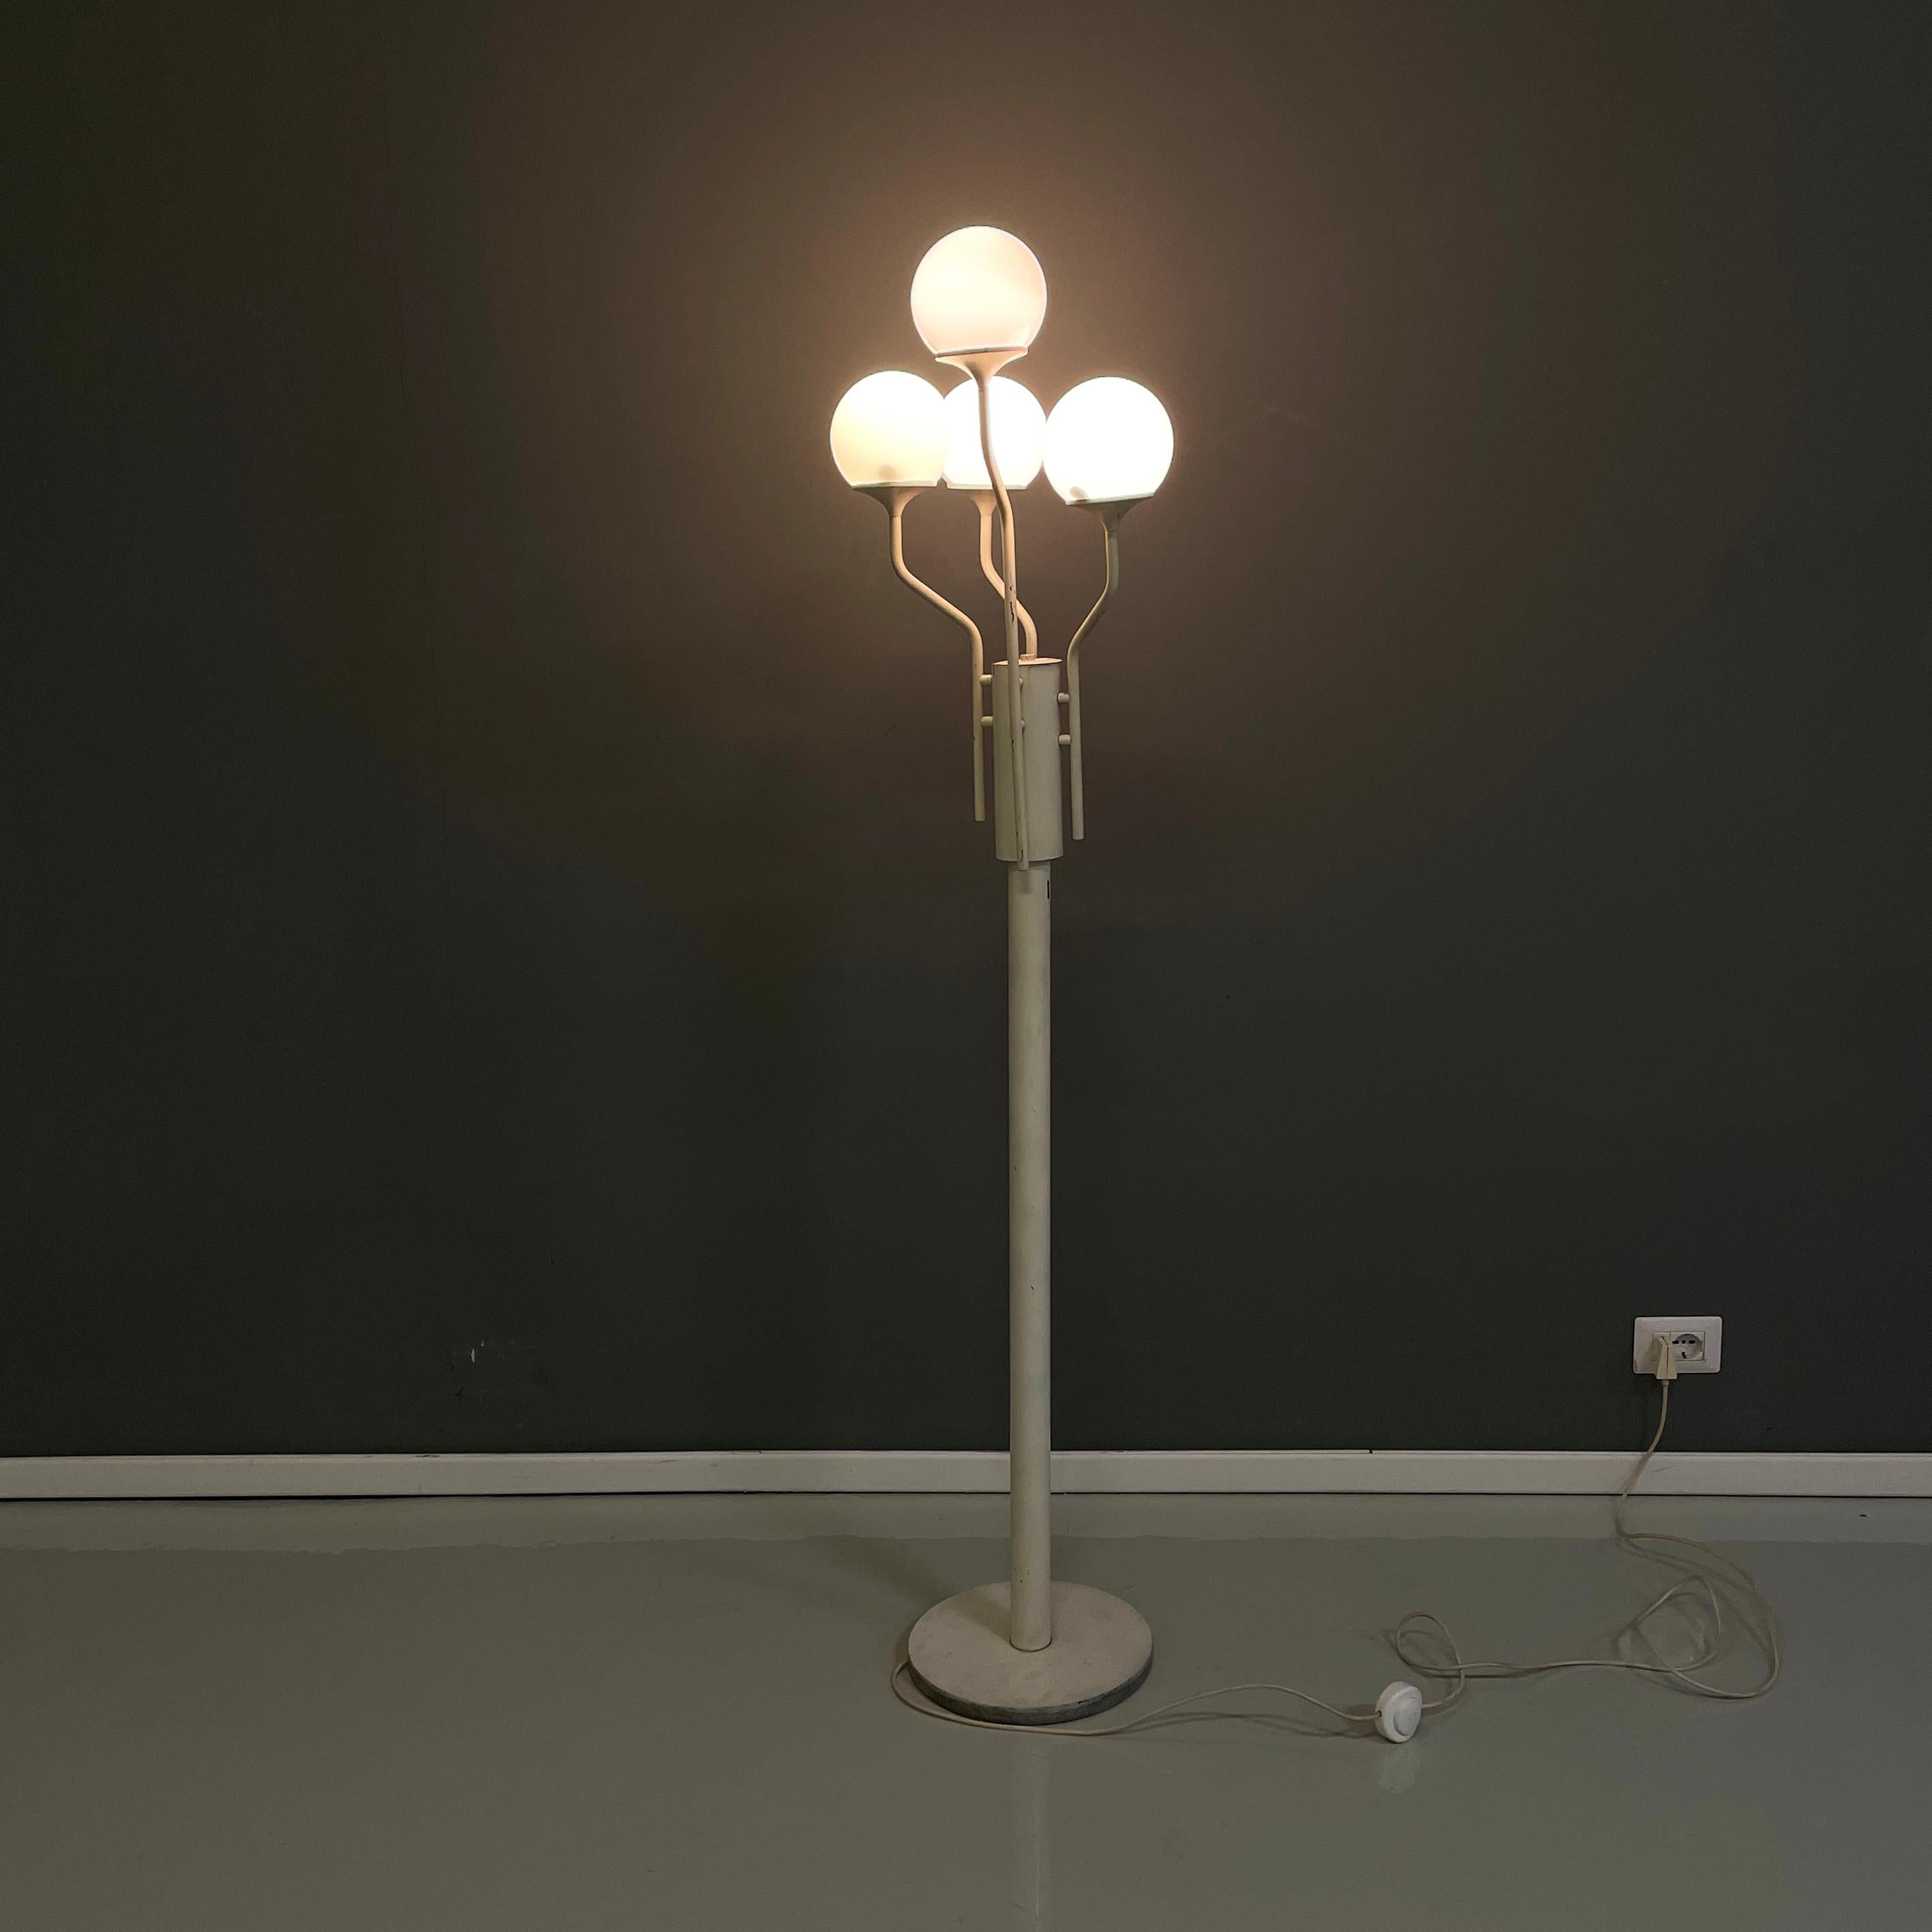 Italian modern floor lamp in opaline glass and white metal, 1980s
Floor lamp with 4 lights in white painted metal. The 4 spherical diffusers are made of opaline glass, each positioned at the end of a white metal rod arm. The 4 arms join at the